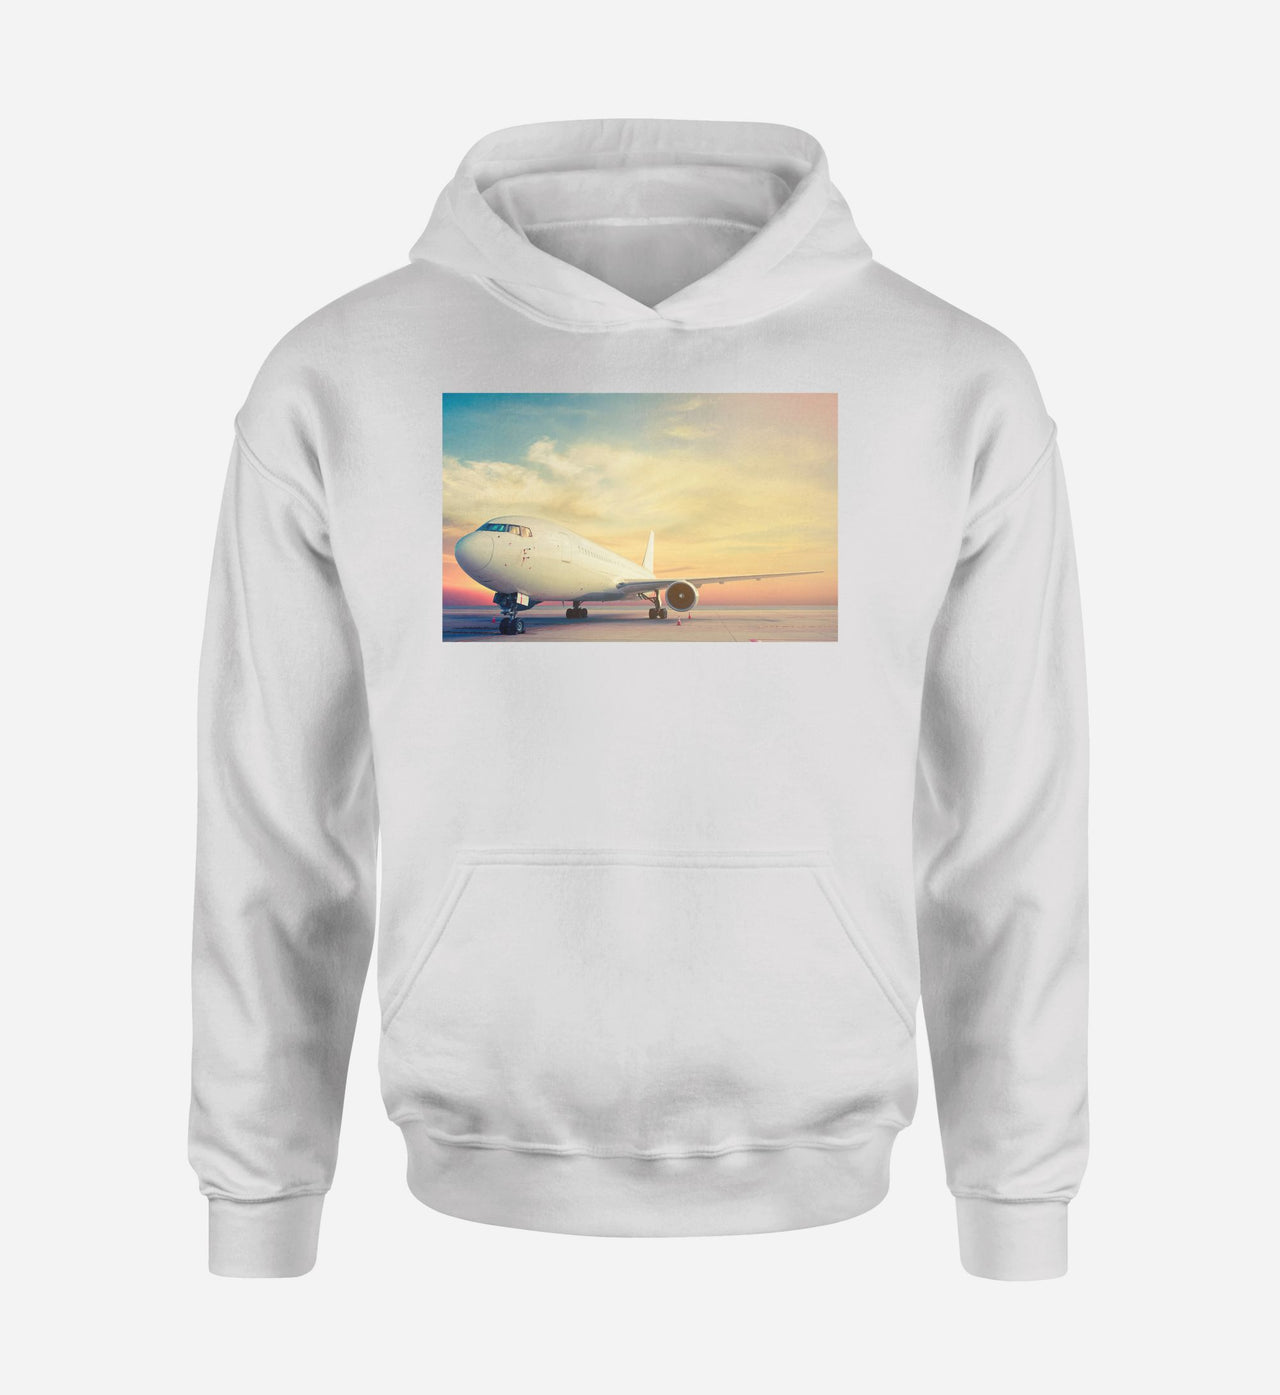 Parked Aircraft During Sunset Designed Hoodies